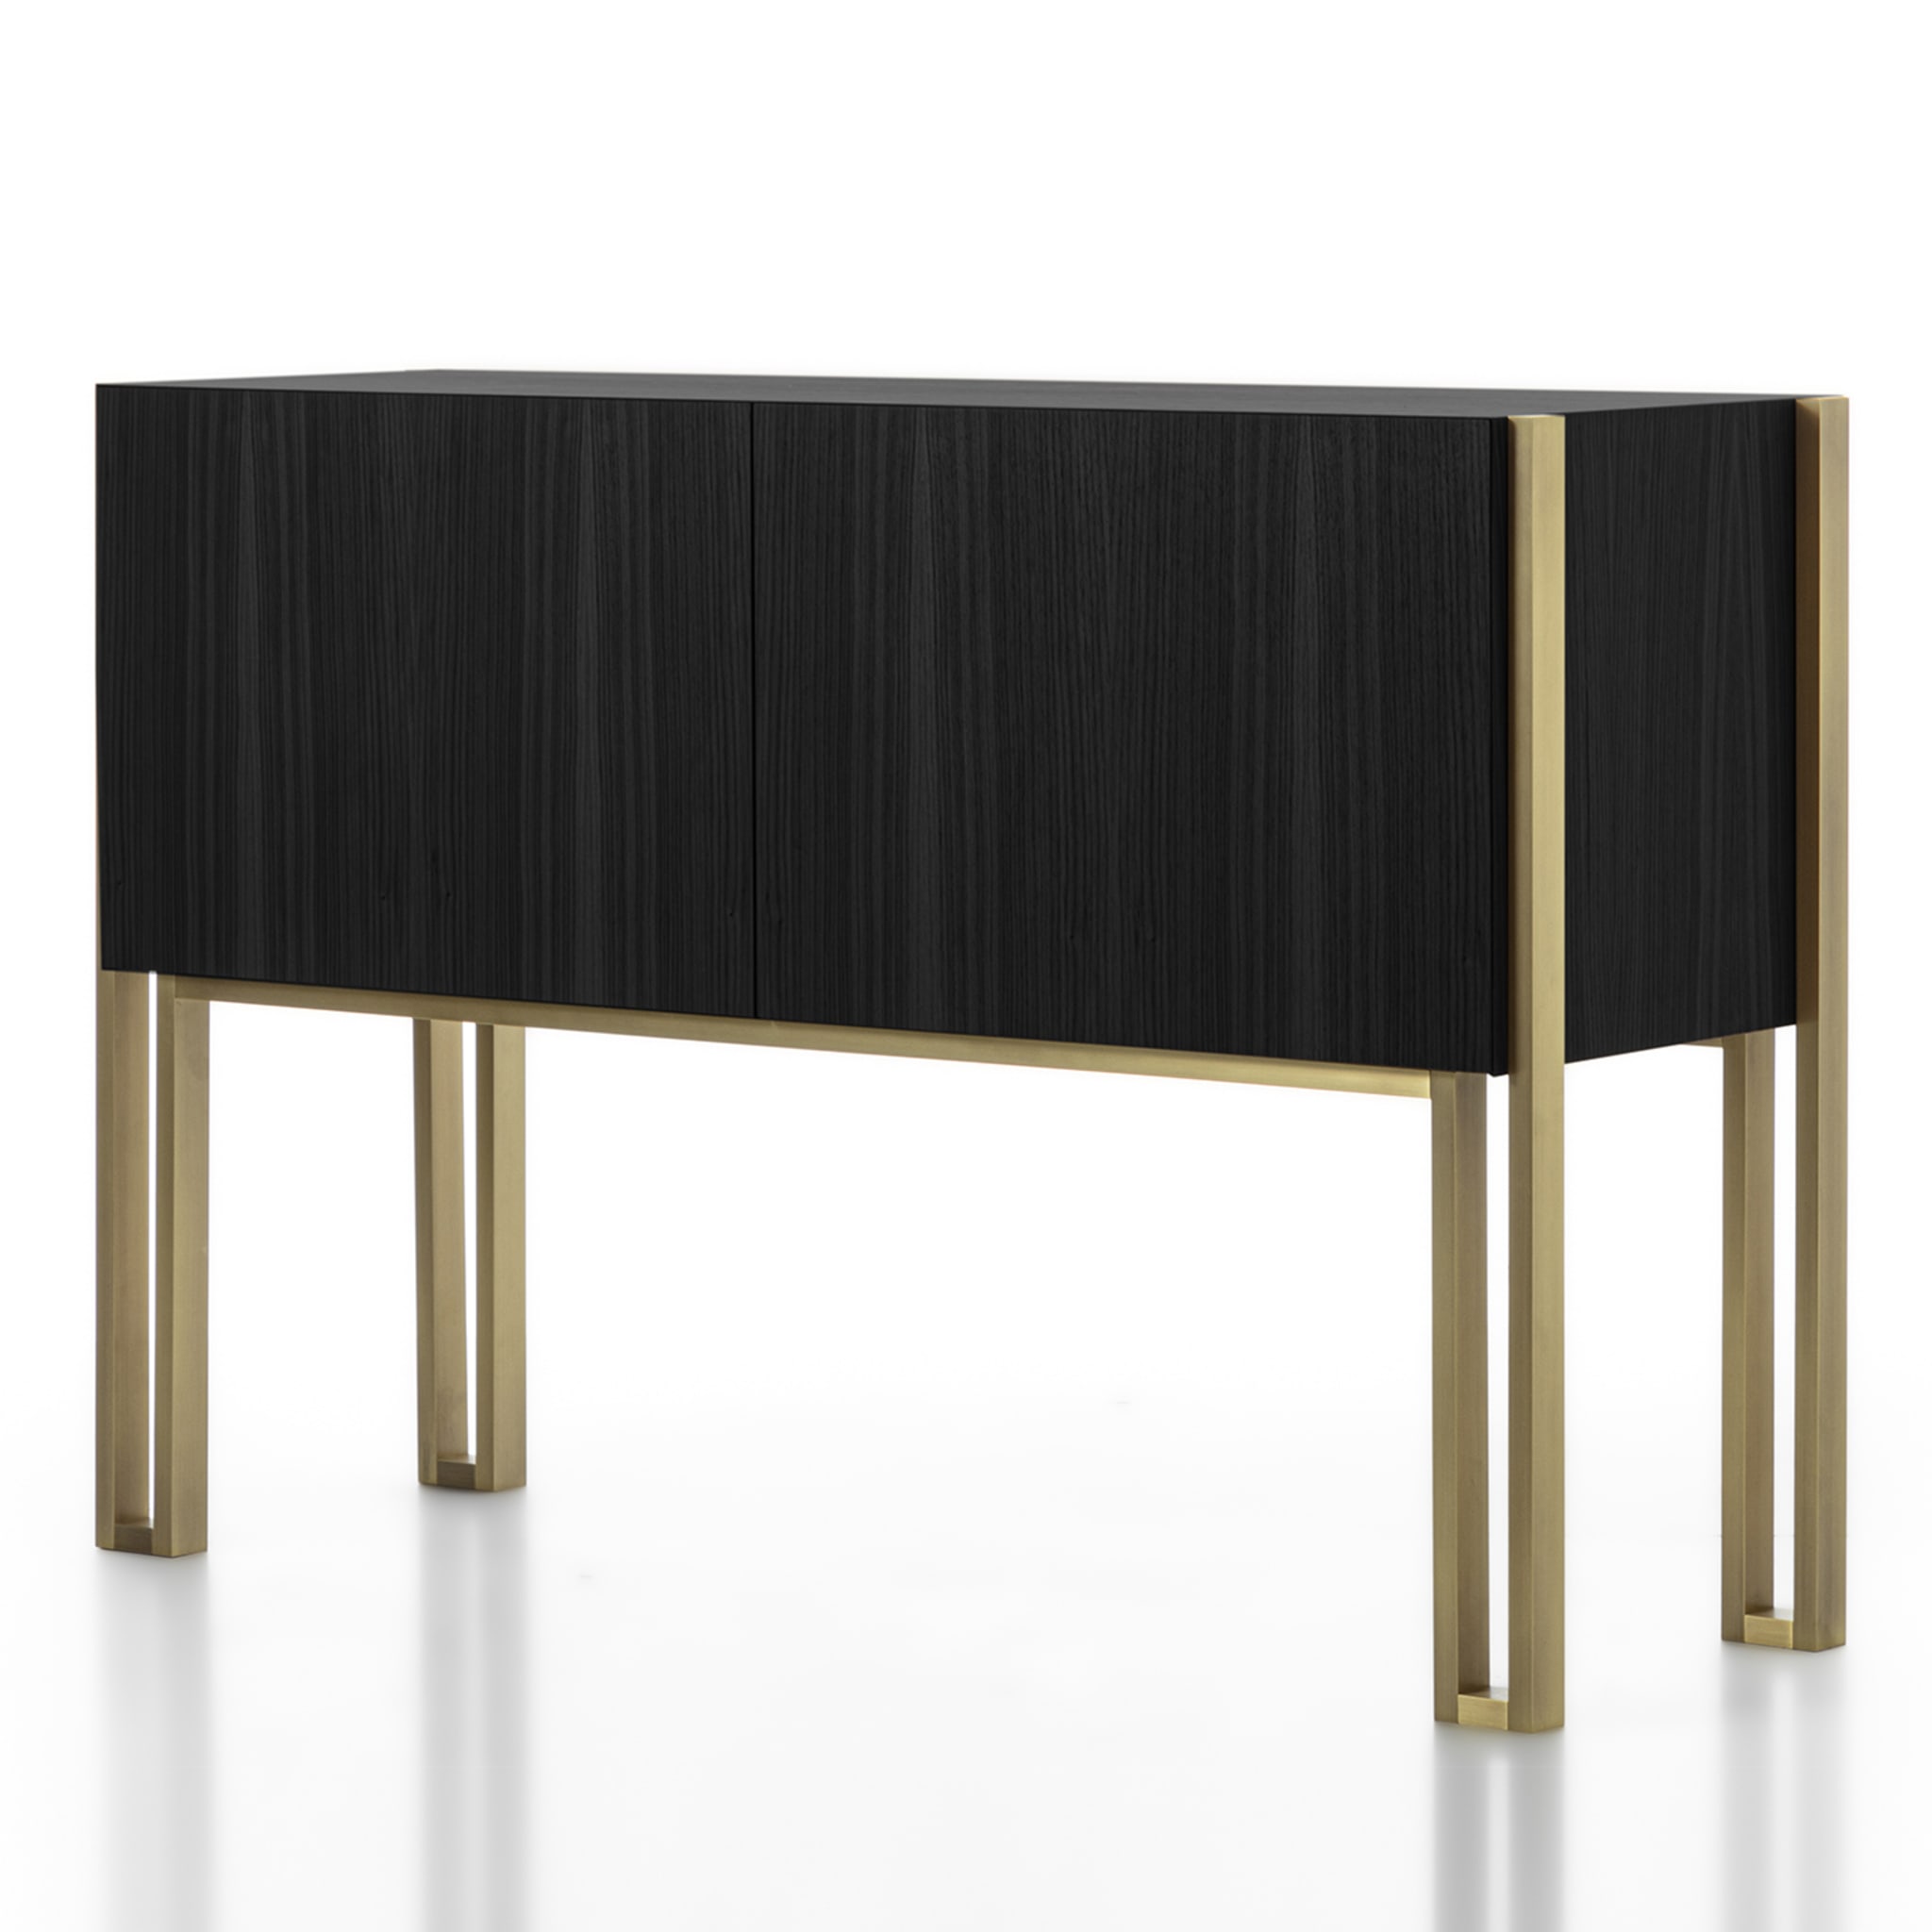 Mirage Vintage with Brass Legs in Opaque Black Sideboard - Alternative view 1